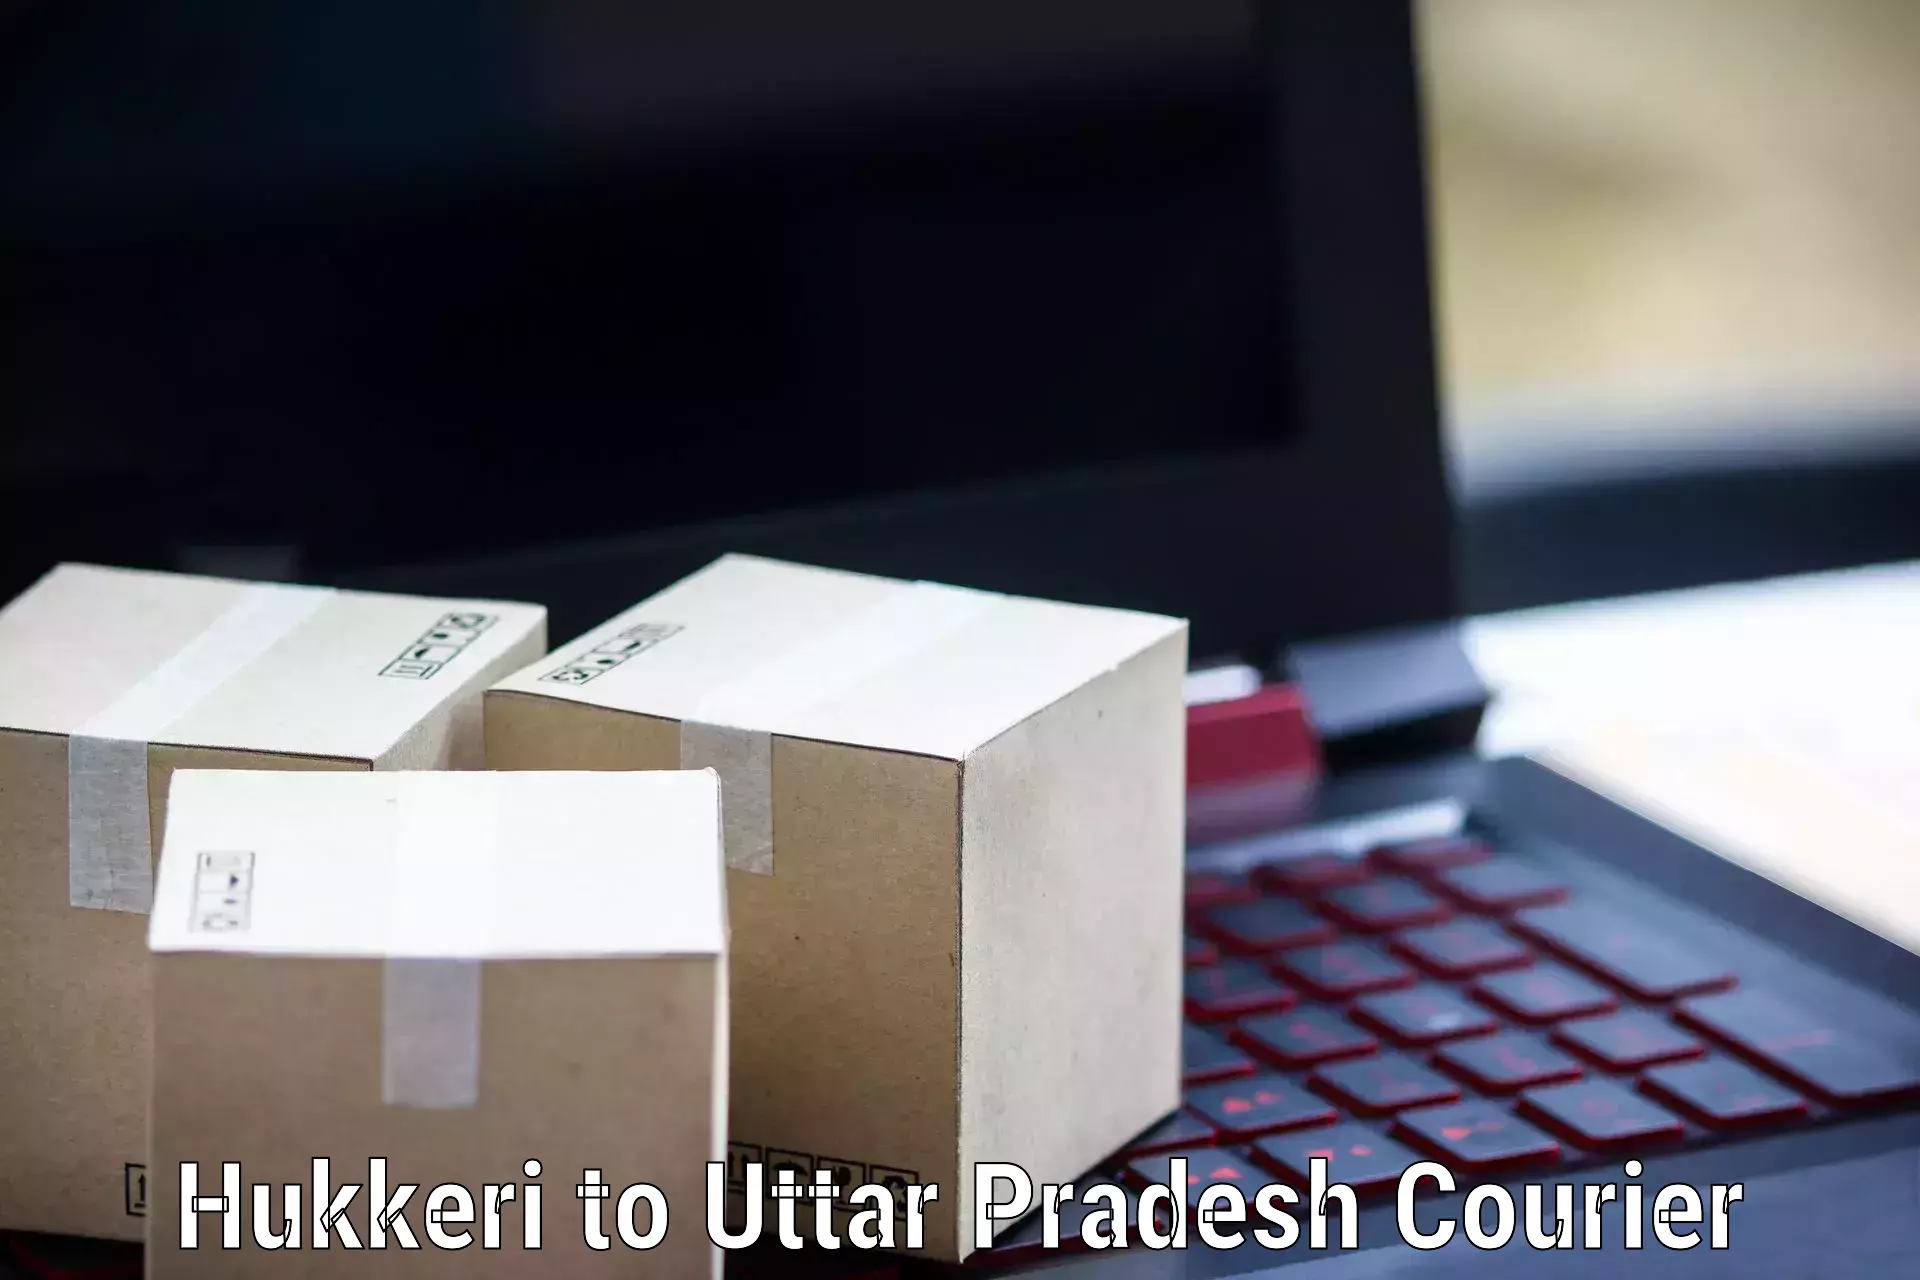 Courier service booking Hukkeri to Agra